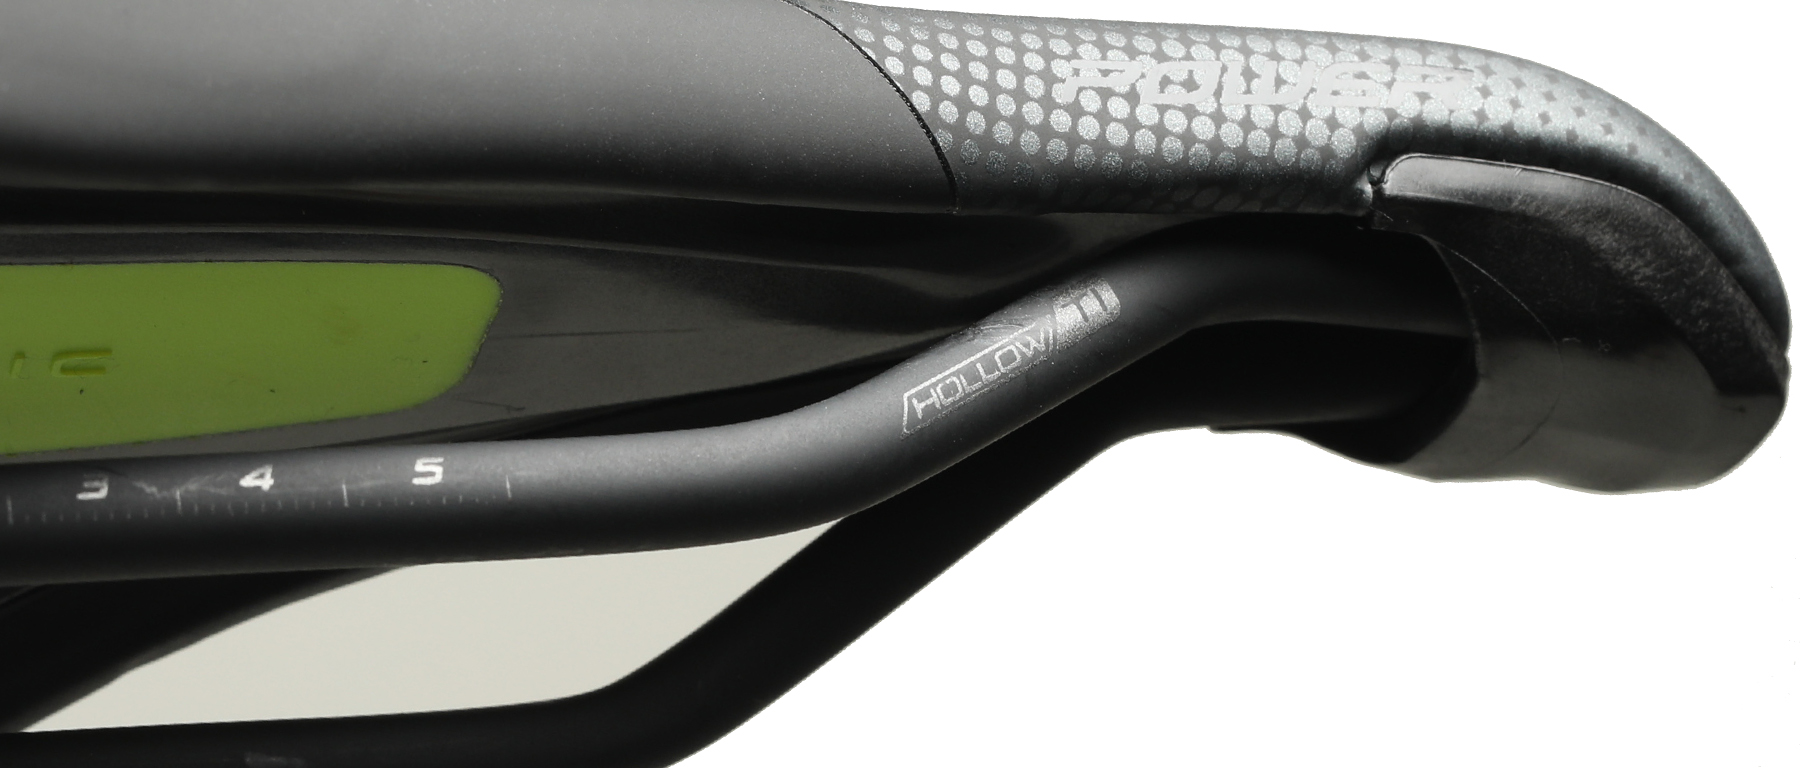 Specialized Power Expert Saddle with MIMIC